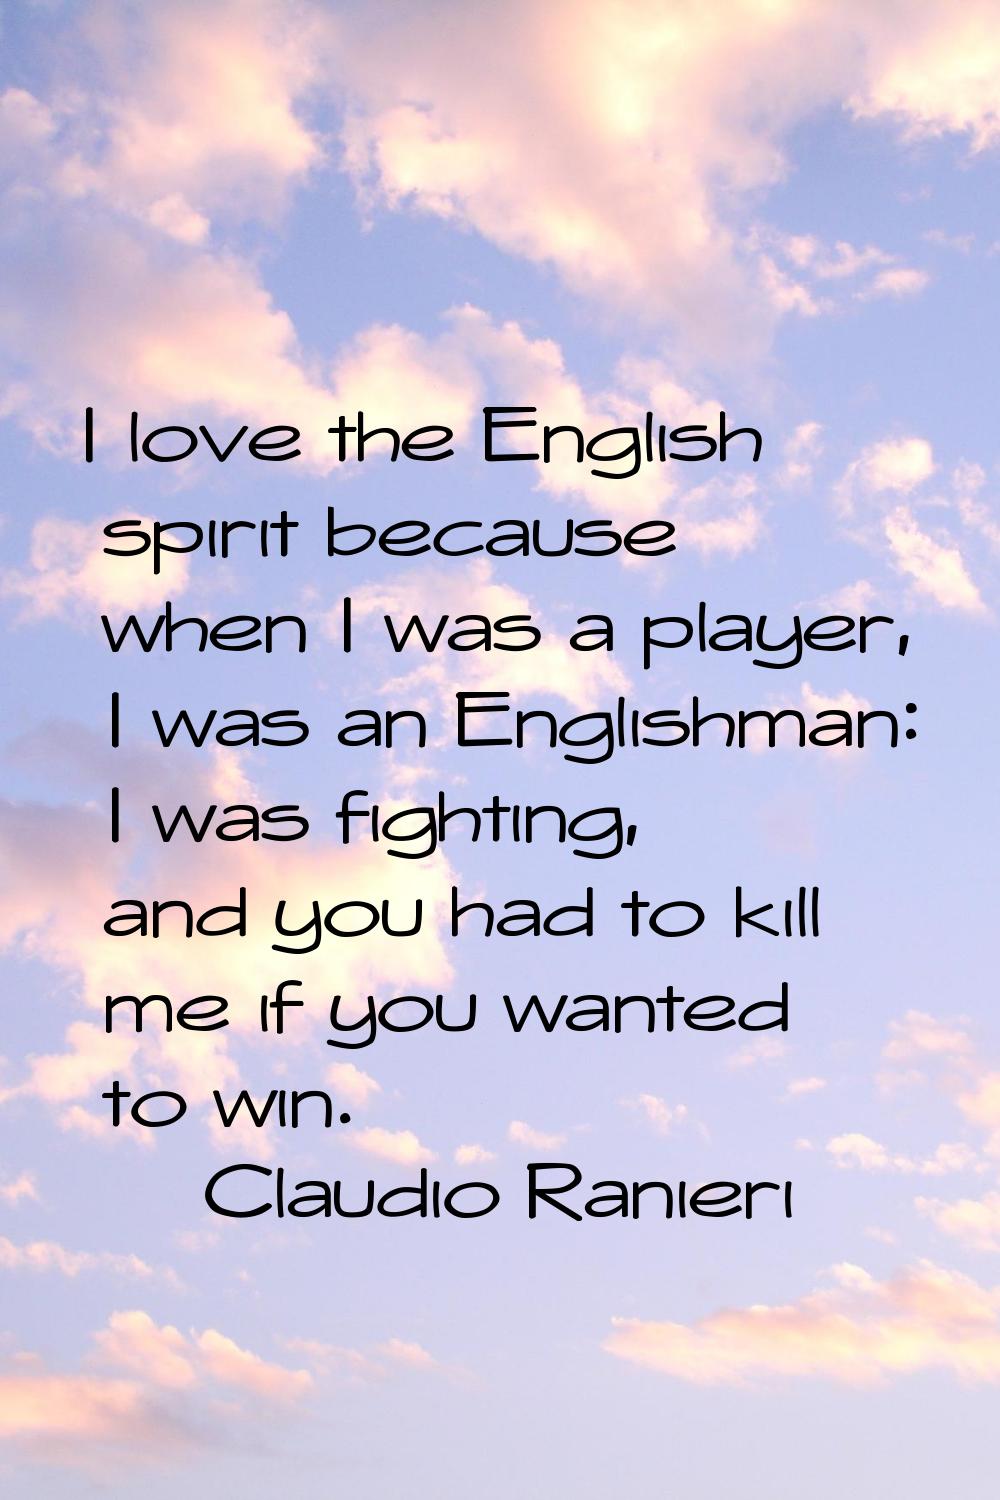 I love the English spirit because when I was a player, I was an Englishman: I was fighting, and you